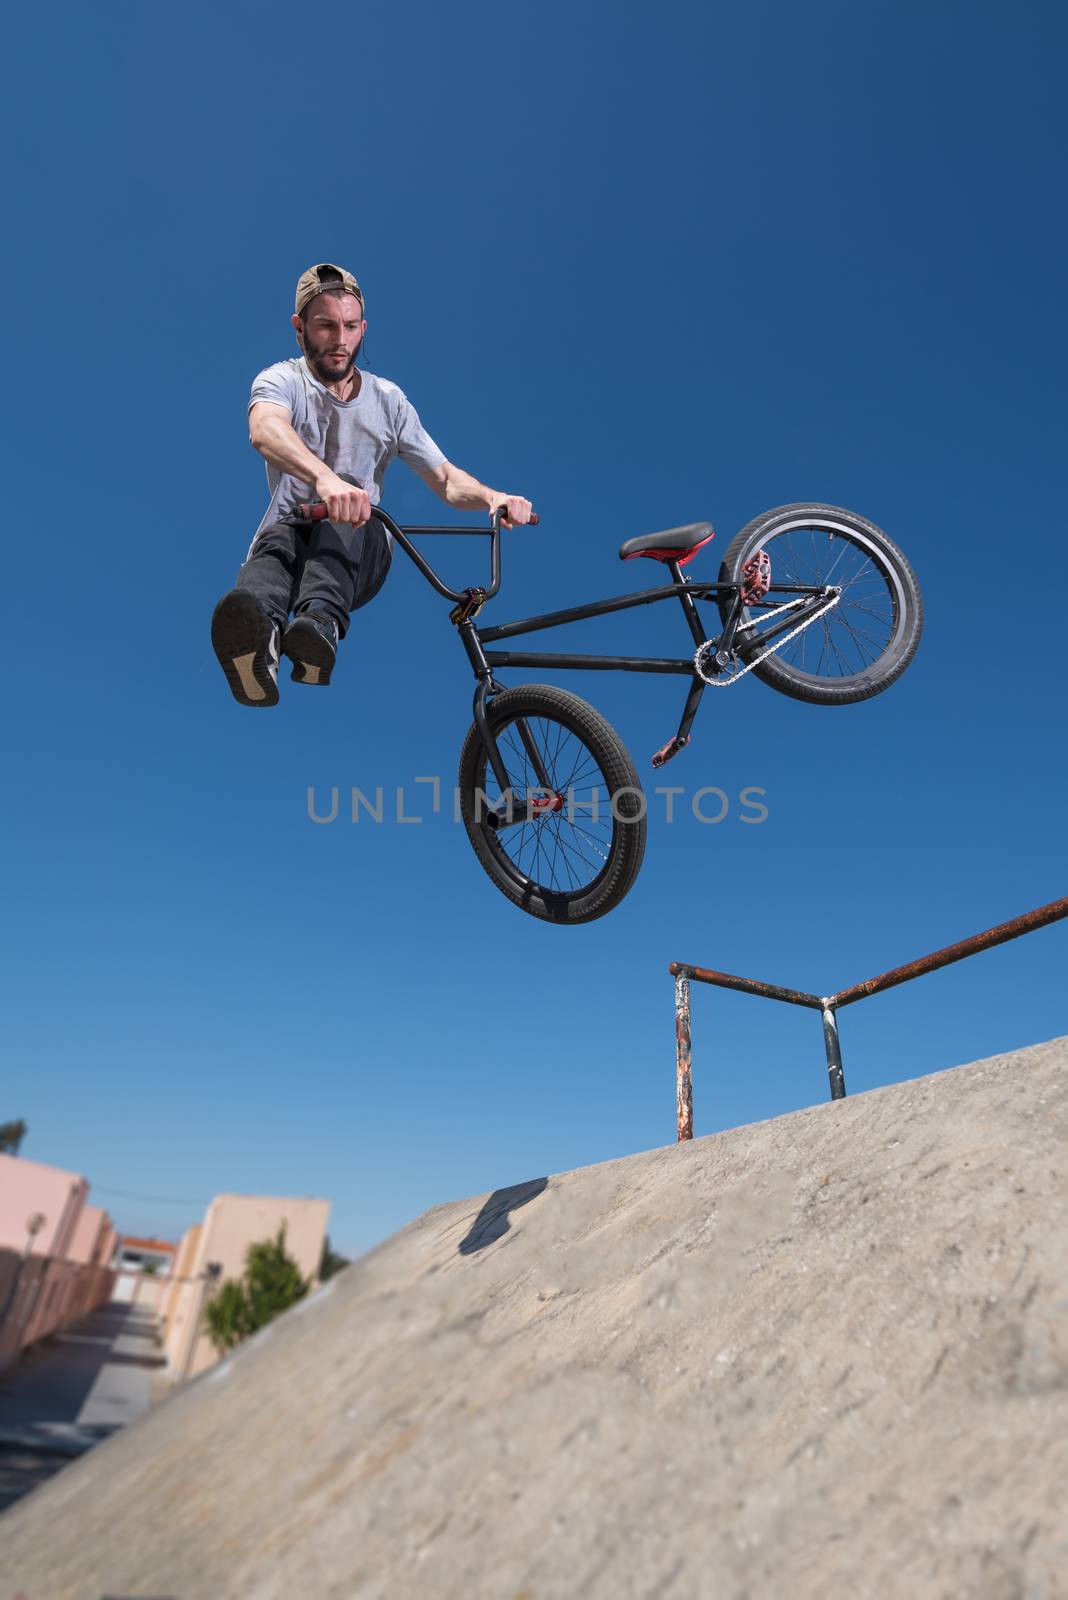 Bmx rider performing a tail whip at a quarter pipe ramp on a skatepark.